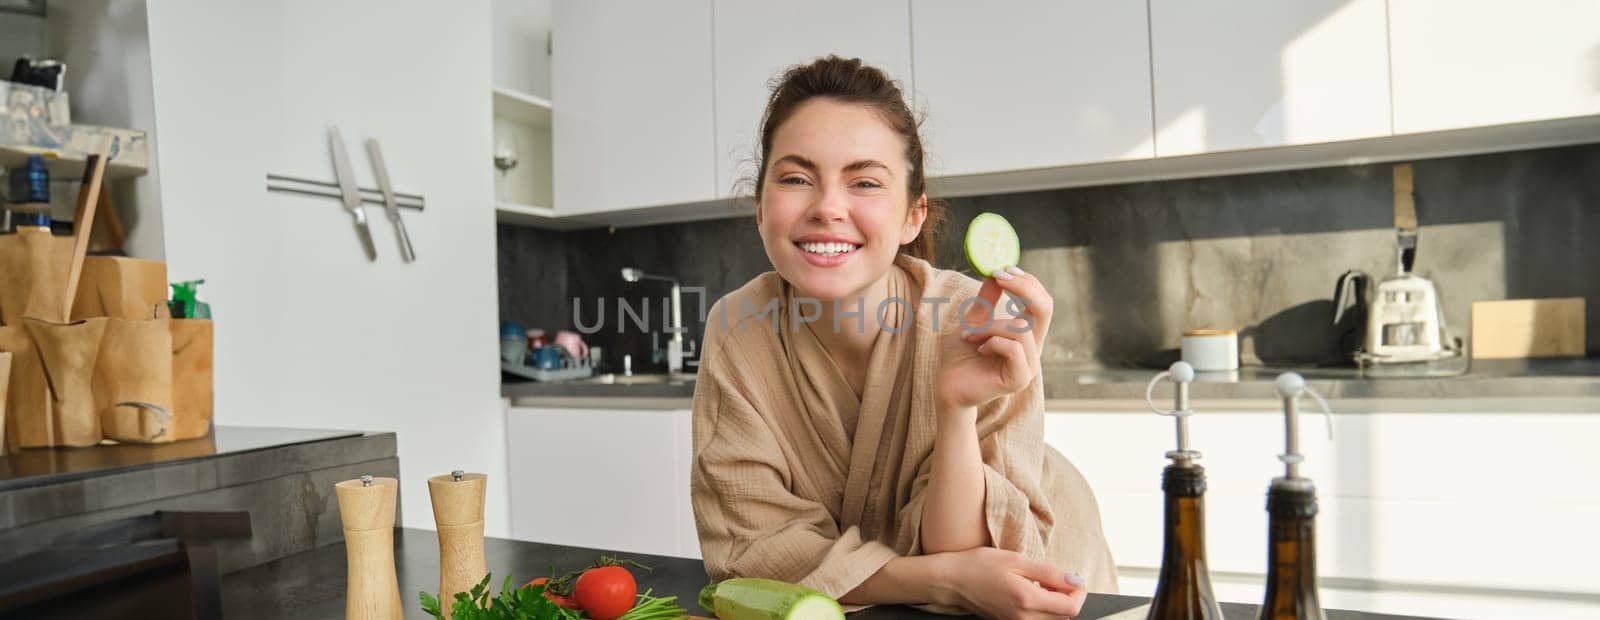 Portrait of cute young woman in bathrobe, cooking meal, standing near chopping board with vegetables, holding zucchini, making salad or vegetarian dinner.